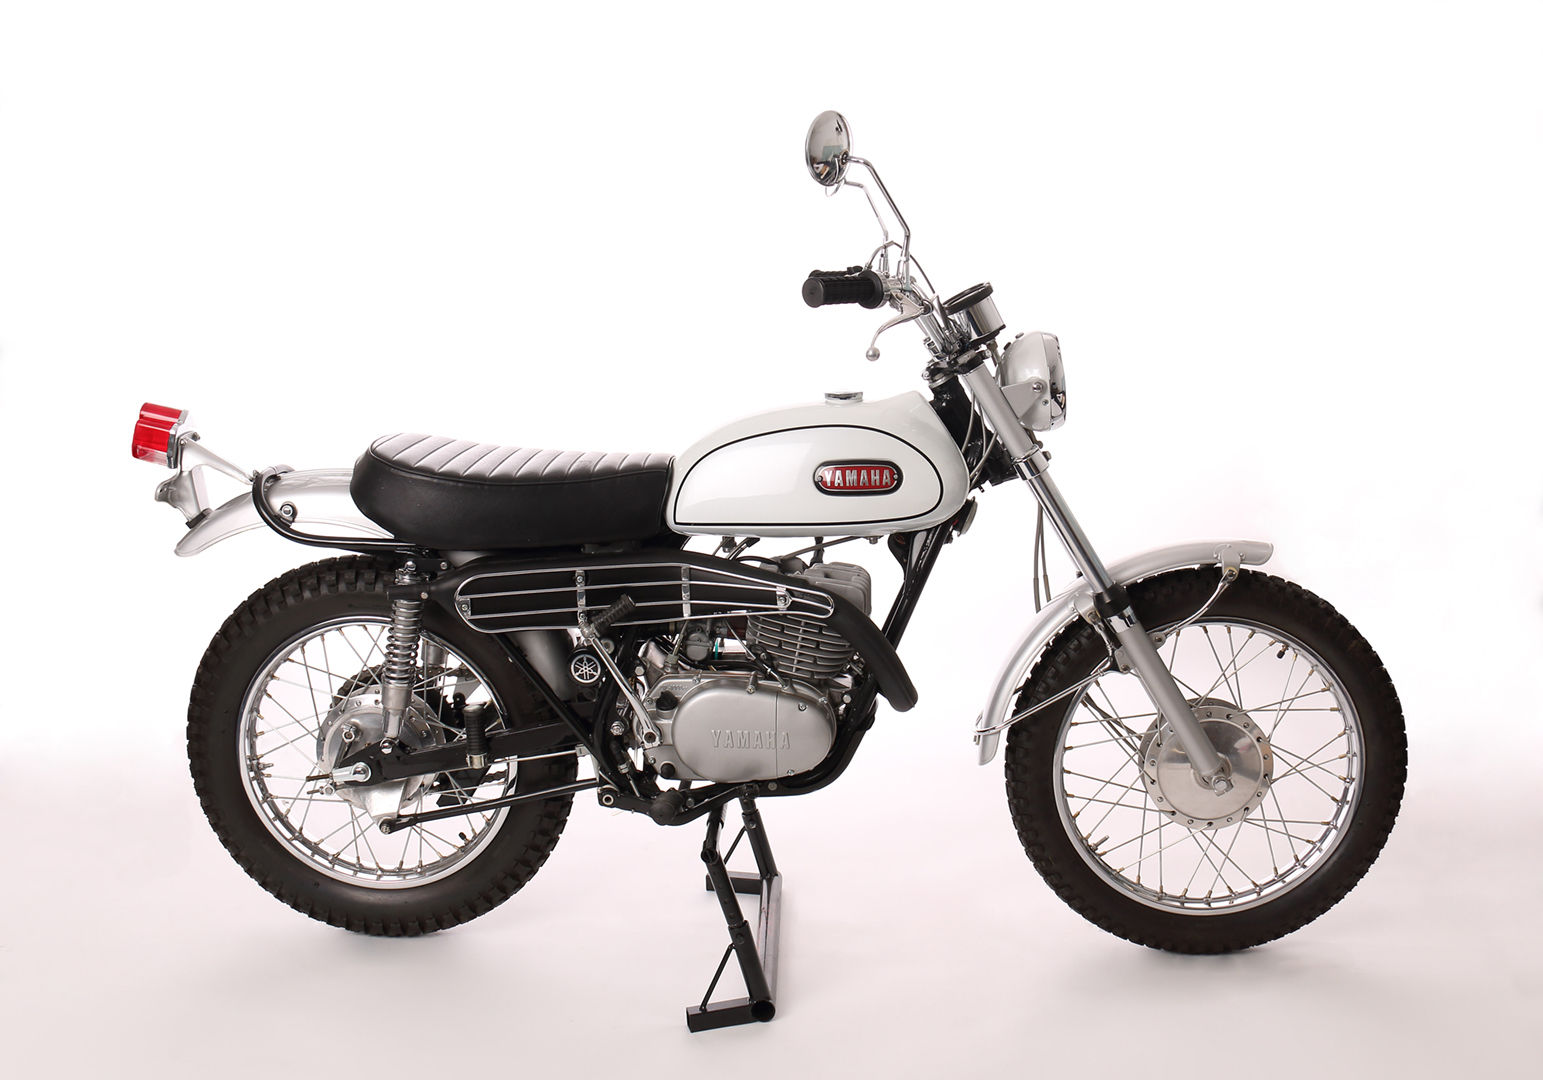 Yamaha DT1 250 - 1968 - Right Side View, Exhaust, Engine and Stand.